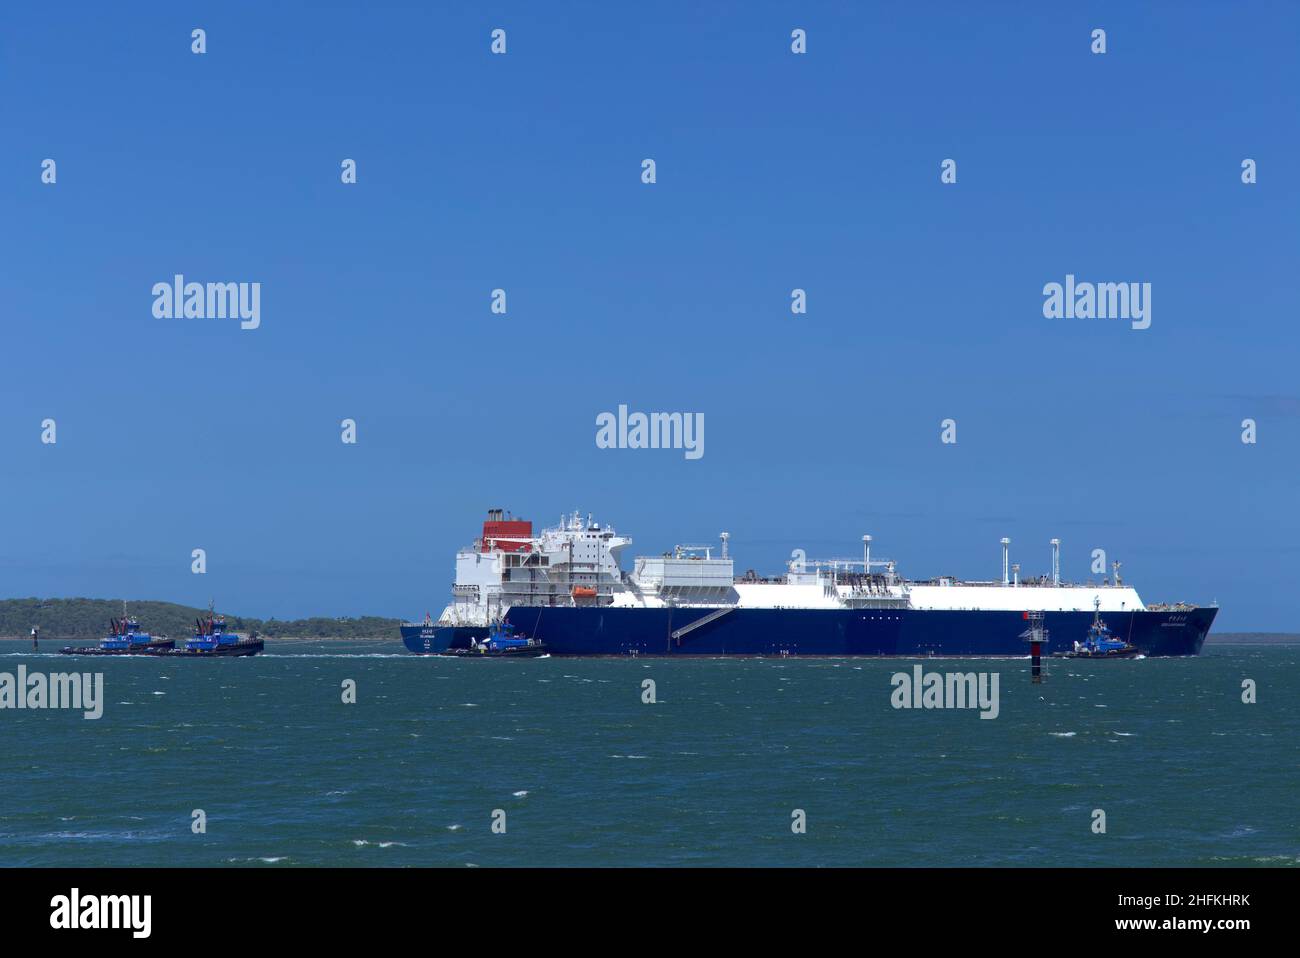 Liquefied natural gas (LNG) bulk carrier vessel ship Cesi Lianyungang departing for China from Curtis Island Gladstone Queensland Australia Stock Photo